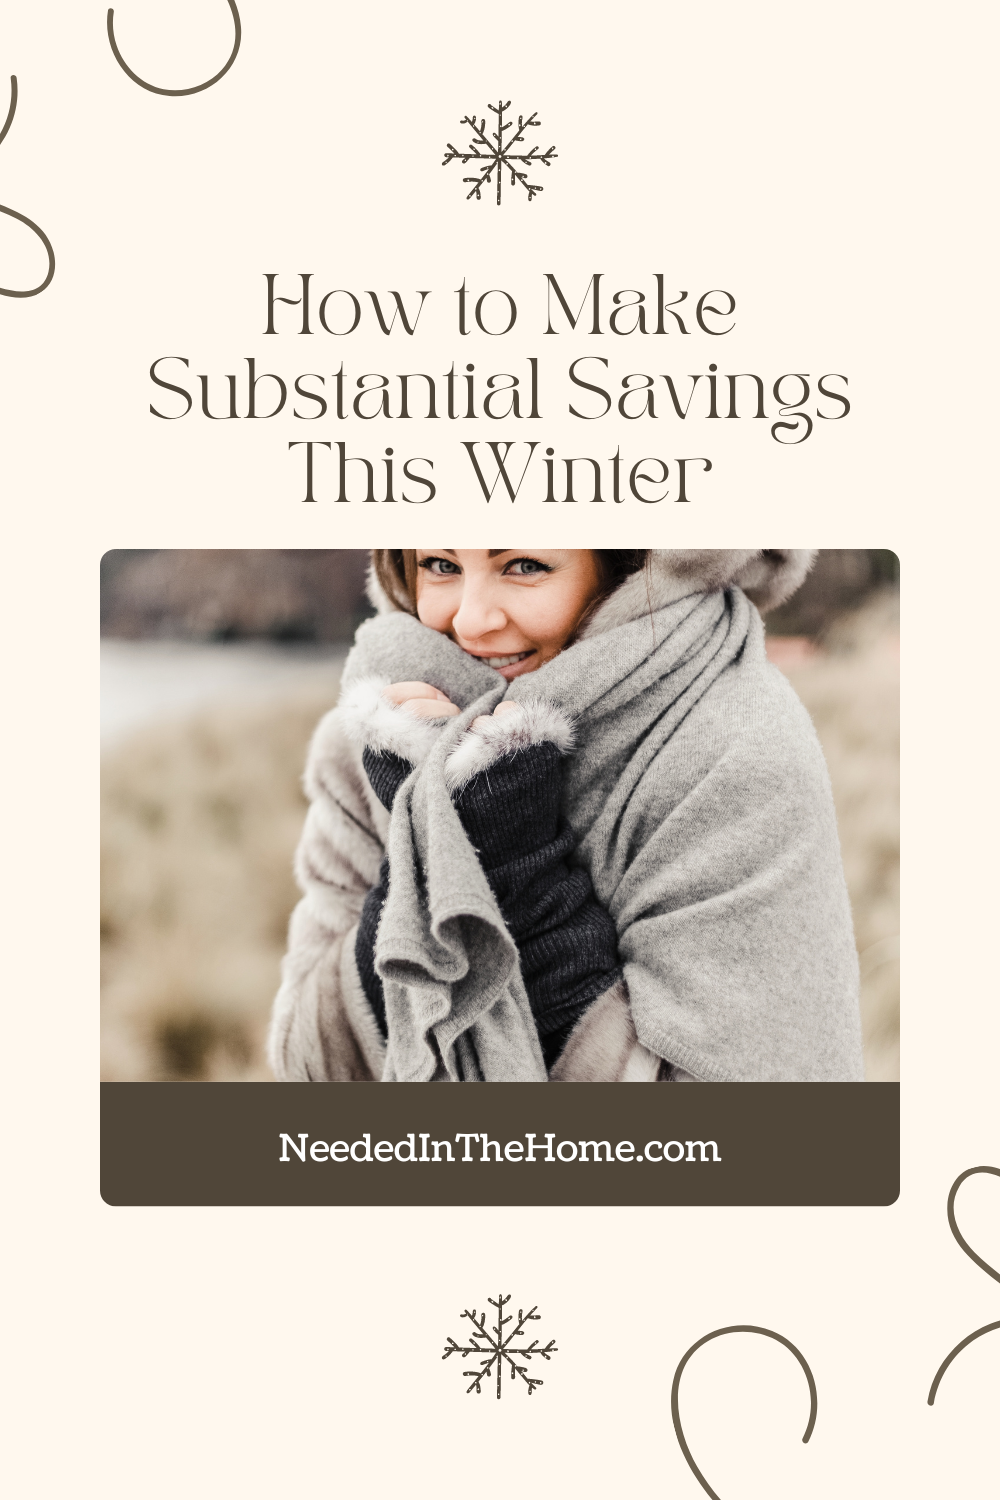 pinterest pin description how to make substantial savings this winter snowflakes woman blanket wrapped around her neededinthehome